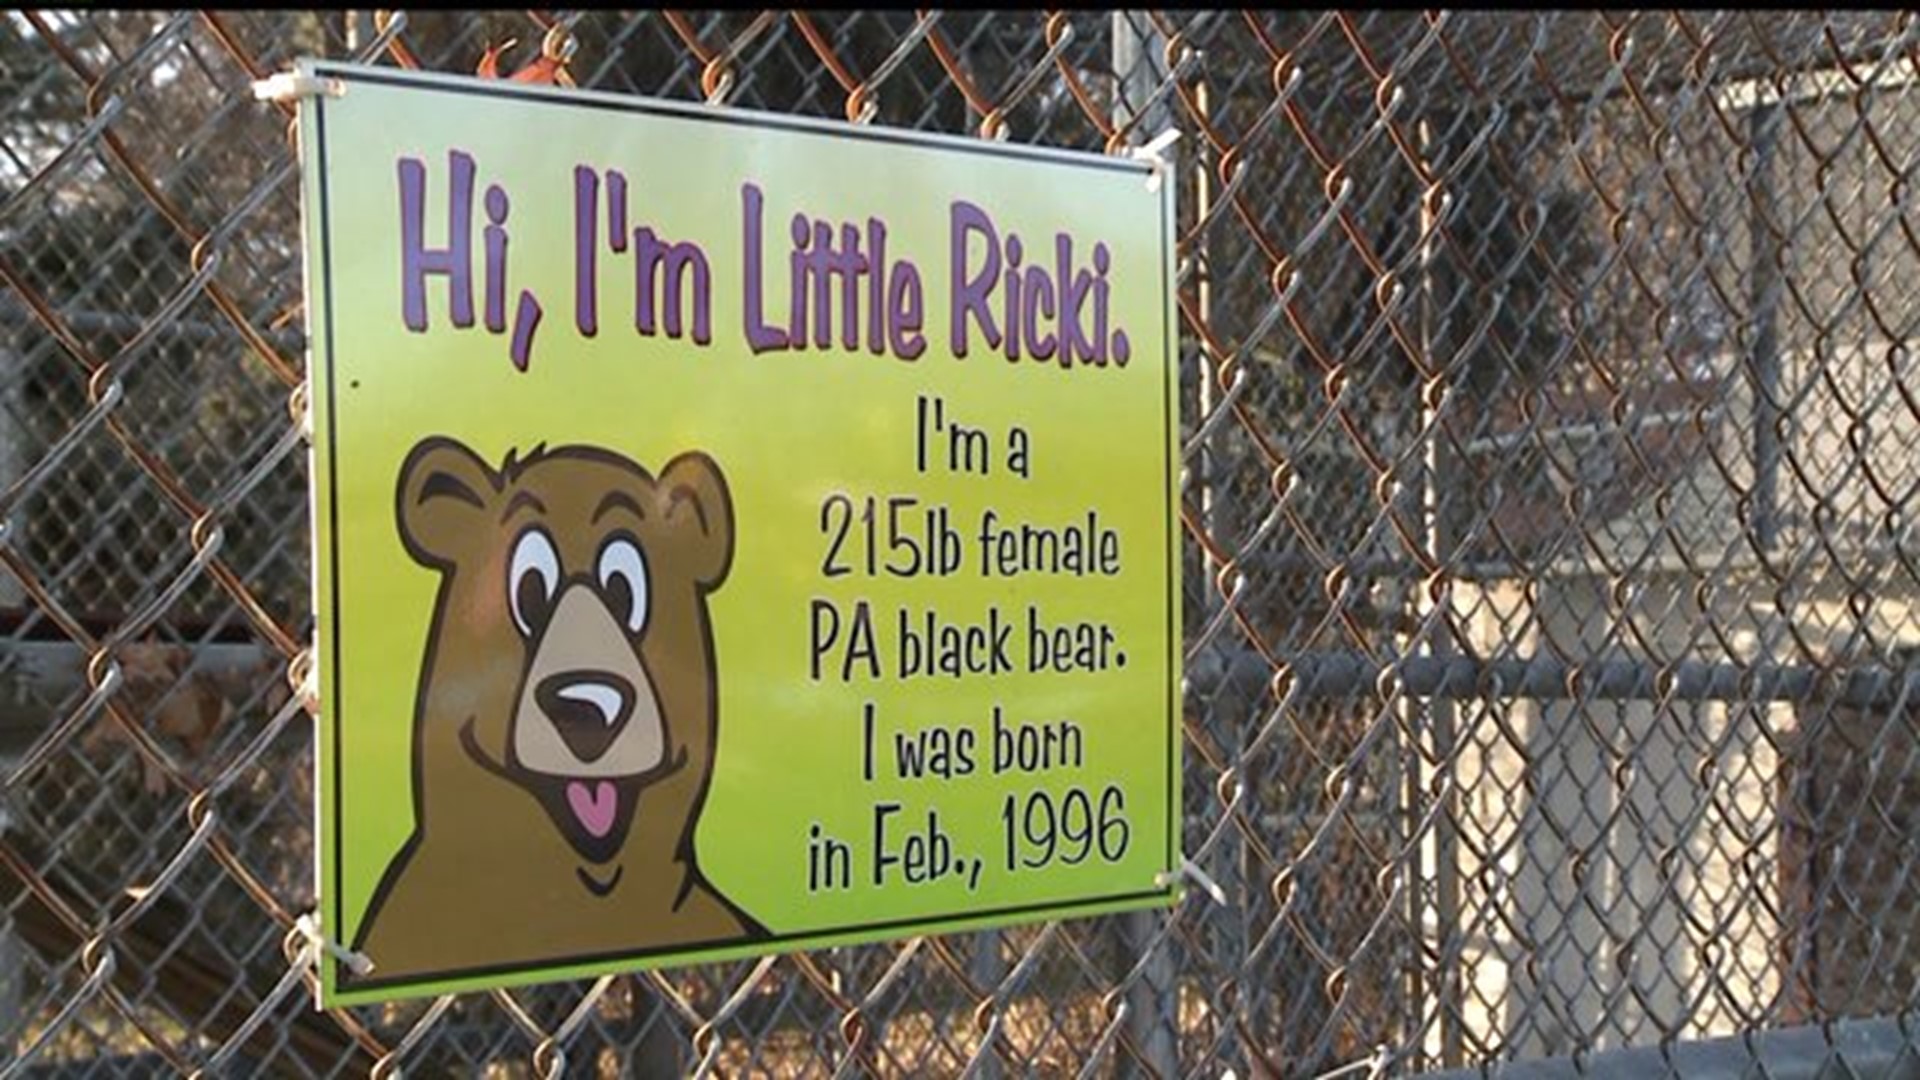 Effort to relocate caged black bear sparks lawsuit in York County